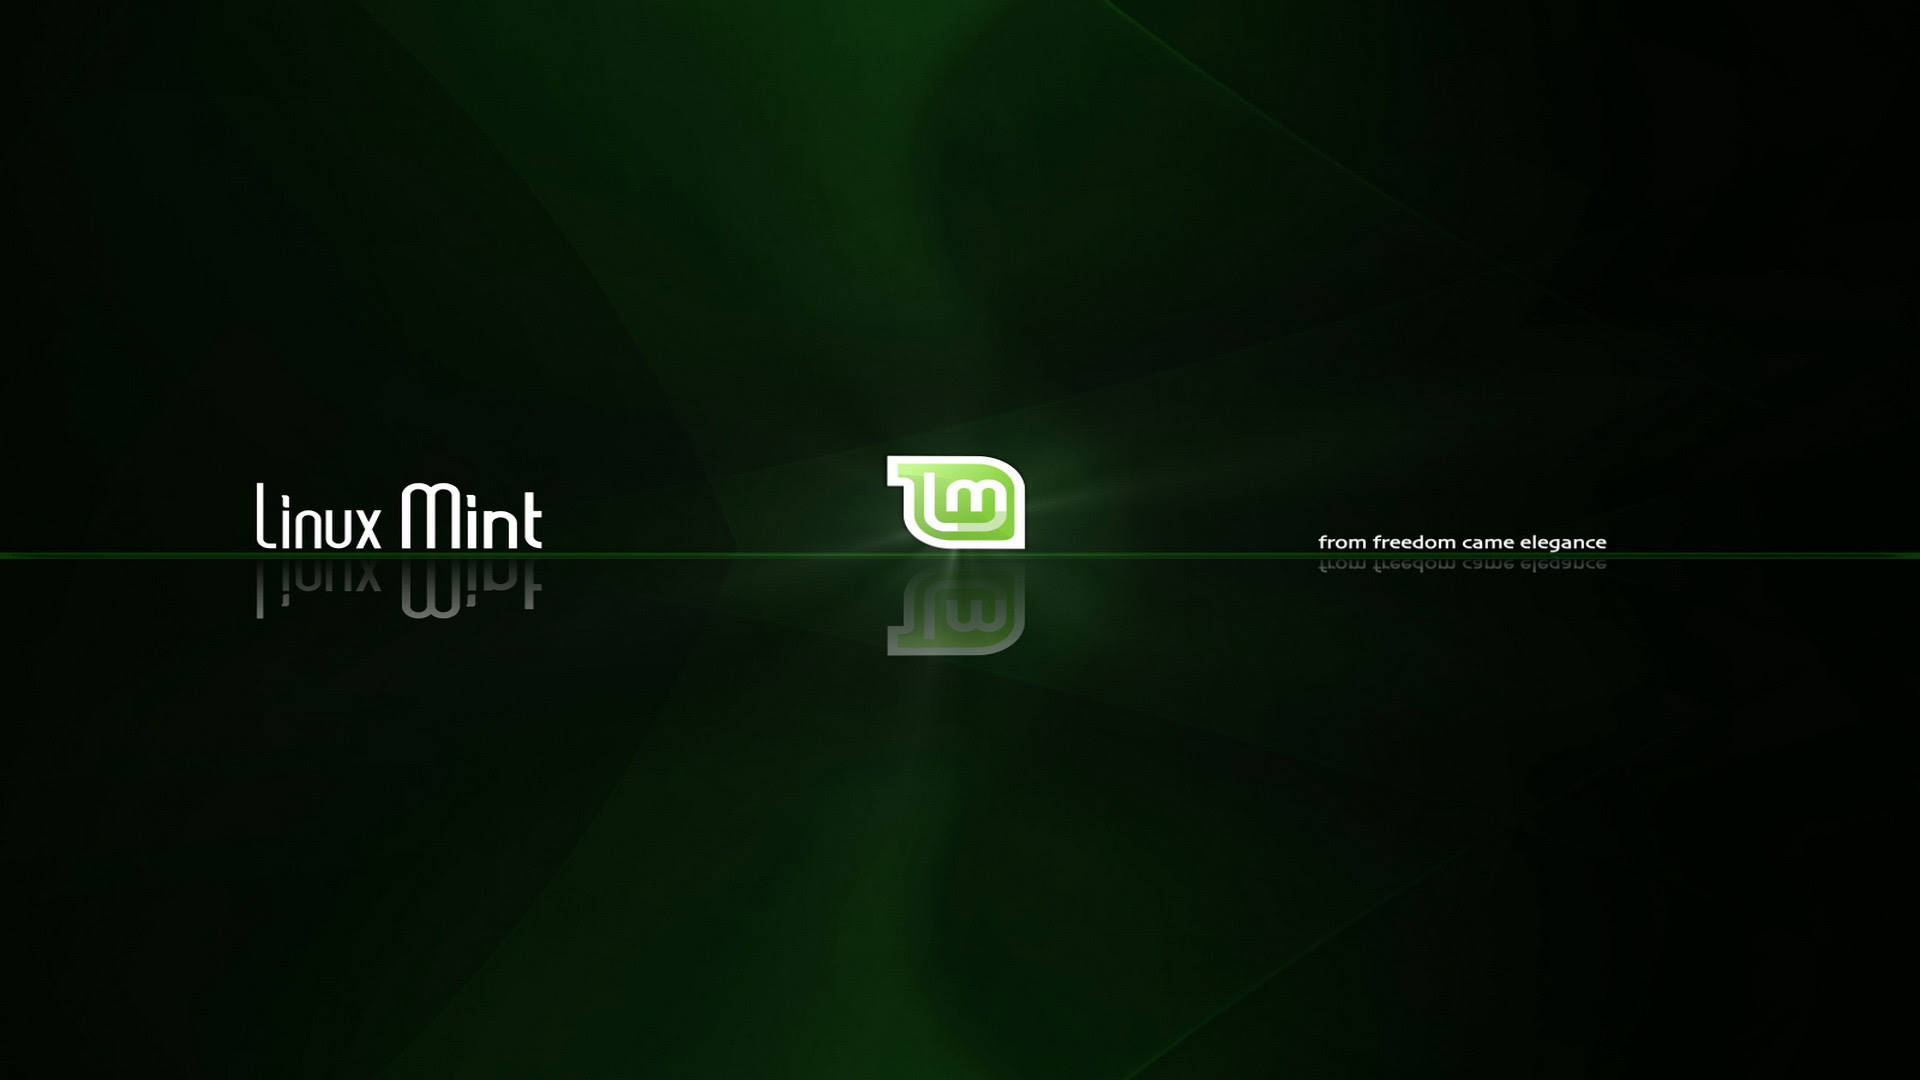 Linux Mint Os From Freedom Came Elegance Background